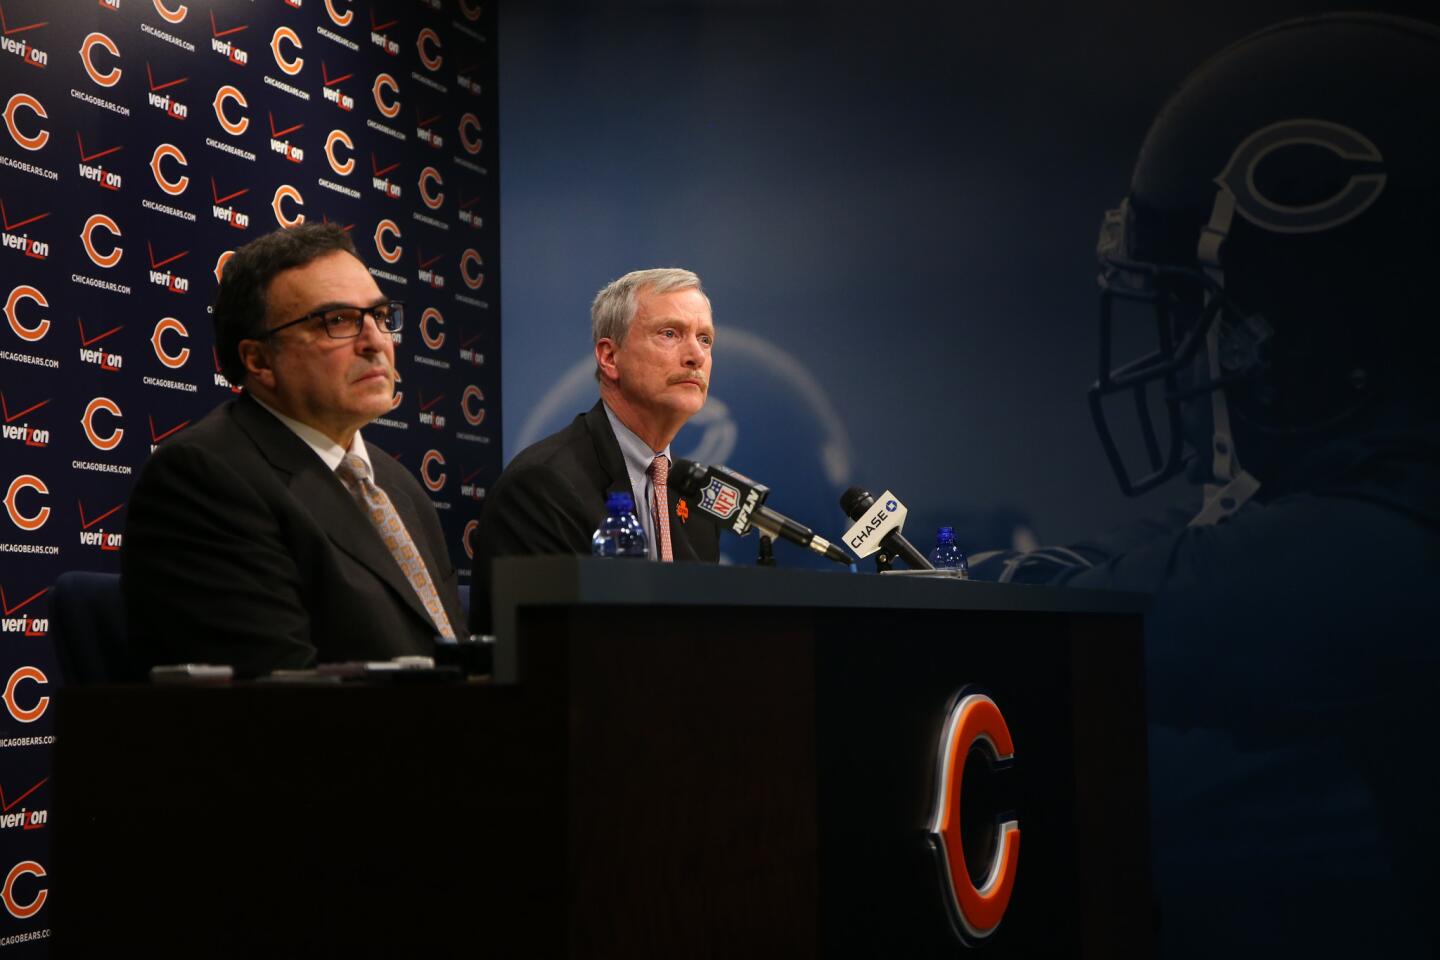 Chicago Bears team president Ted Phillips, left, and chairman George McCaskey address the media about the recent firings of head coach Marc Trestman and general manager Phil Emery.